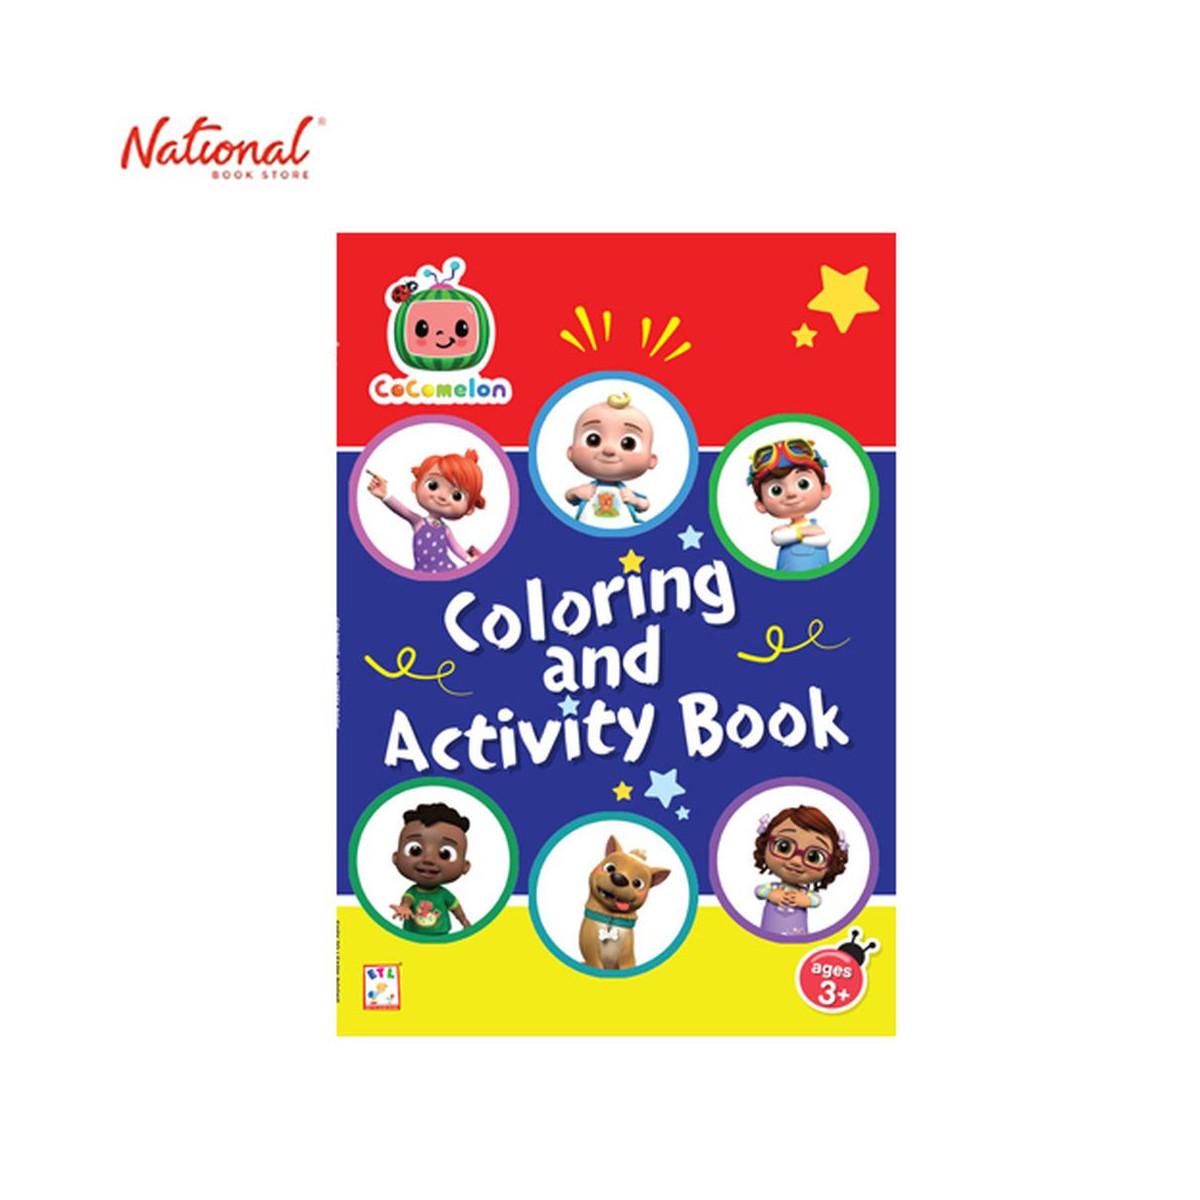 Cocomelon Coloring And Activity Book Trade Paperback by Precious Pages